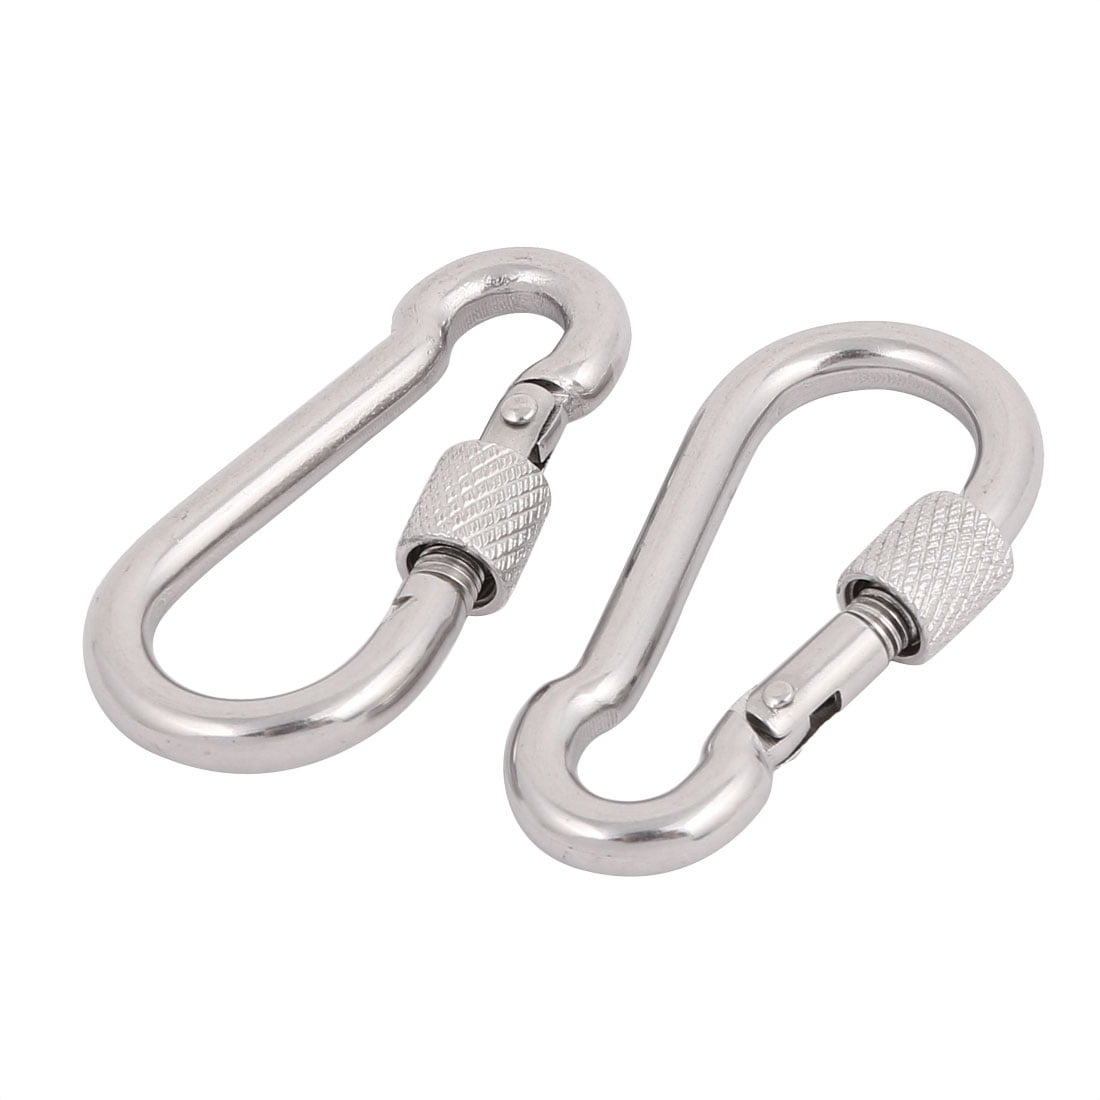 Lovermusic 5PCS M5 Spring Buckles Spring Snap Hook Carabiner 304 Stainless Steel Clips 